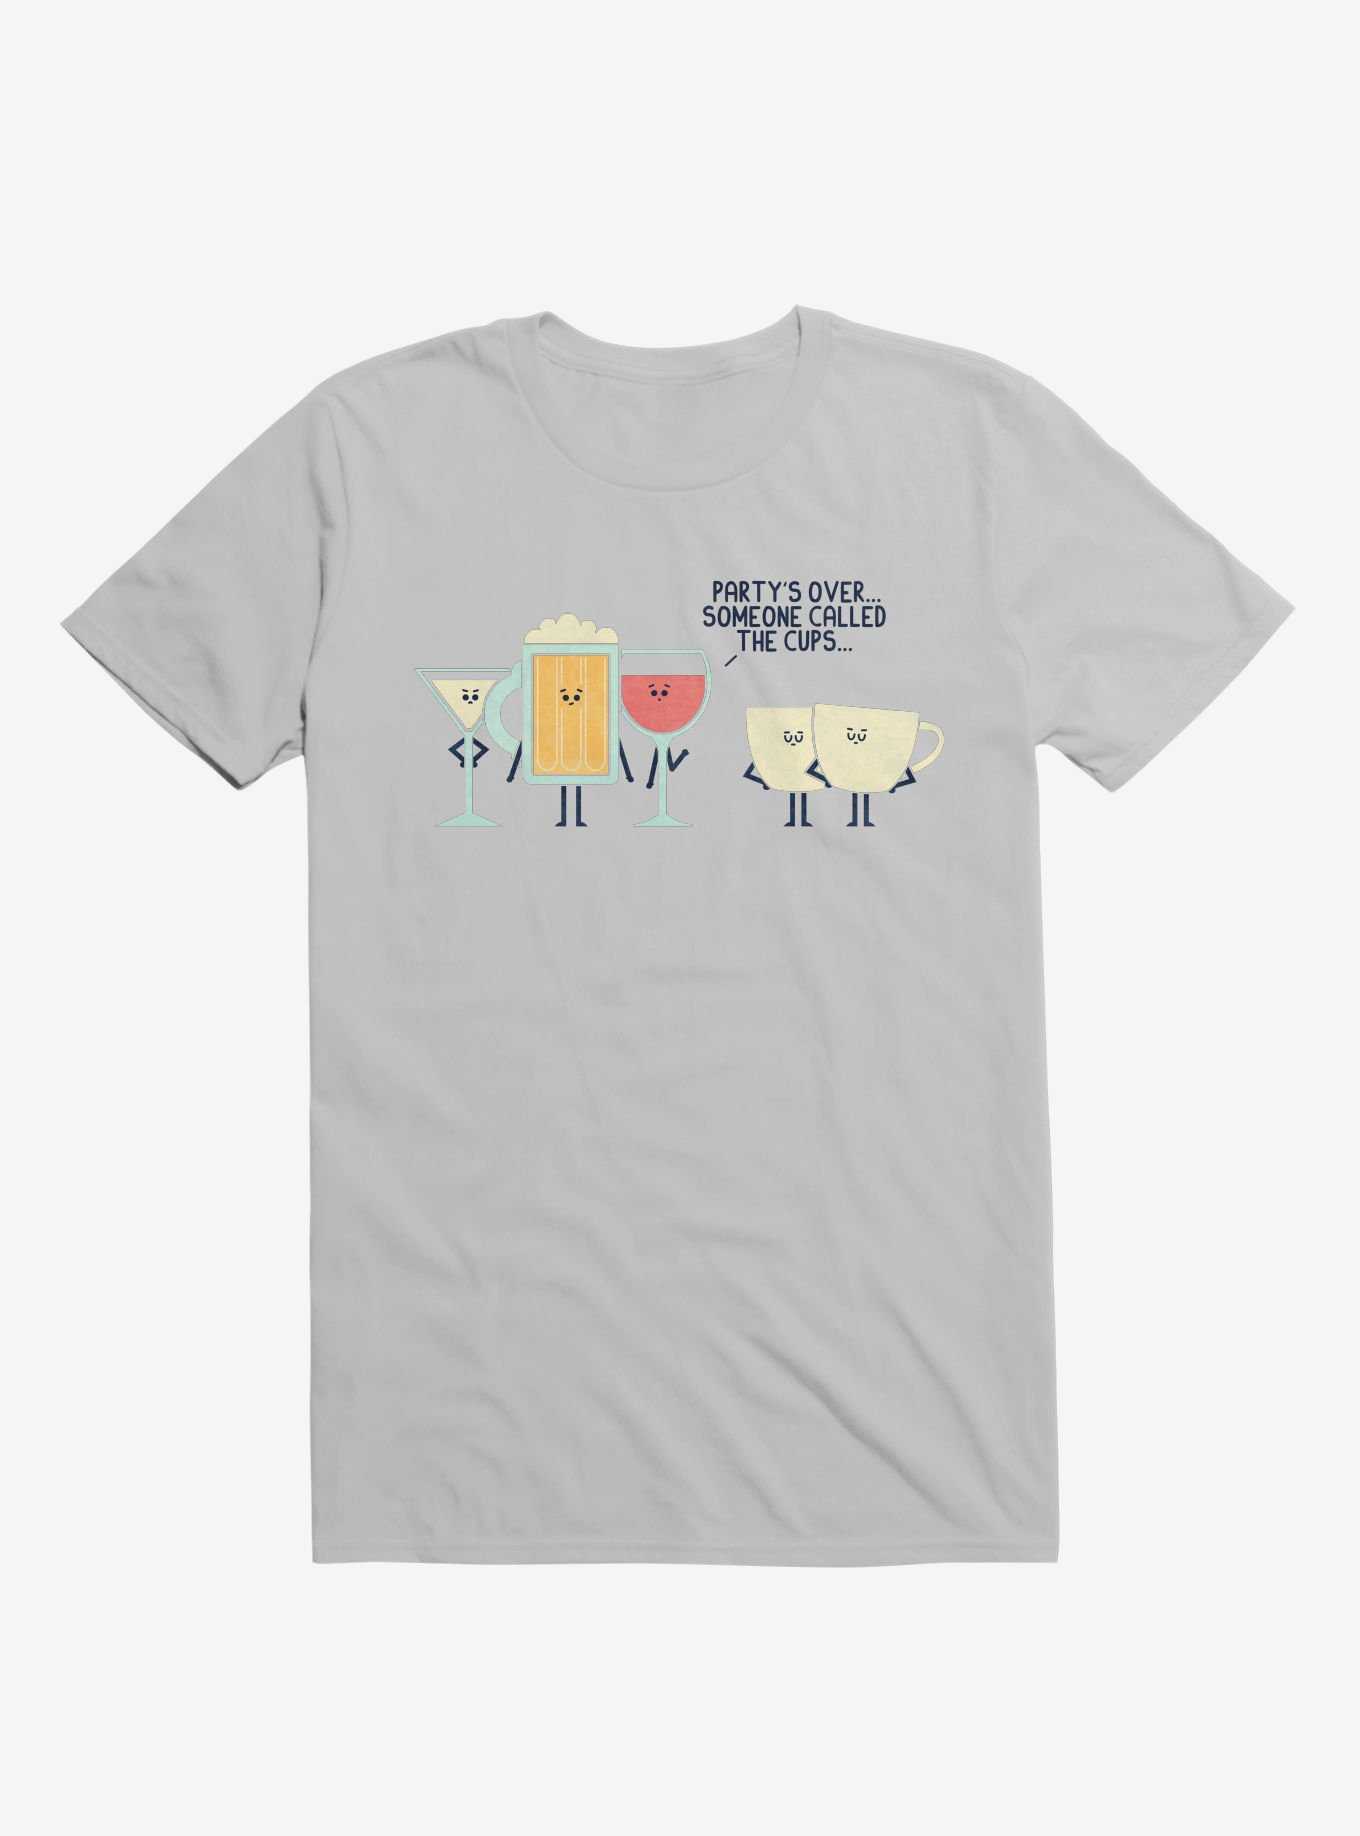 Party's Over Someone Called The Cups Ice Grey T-Shirt, , hi-res